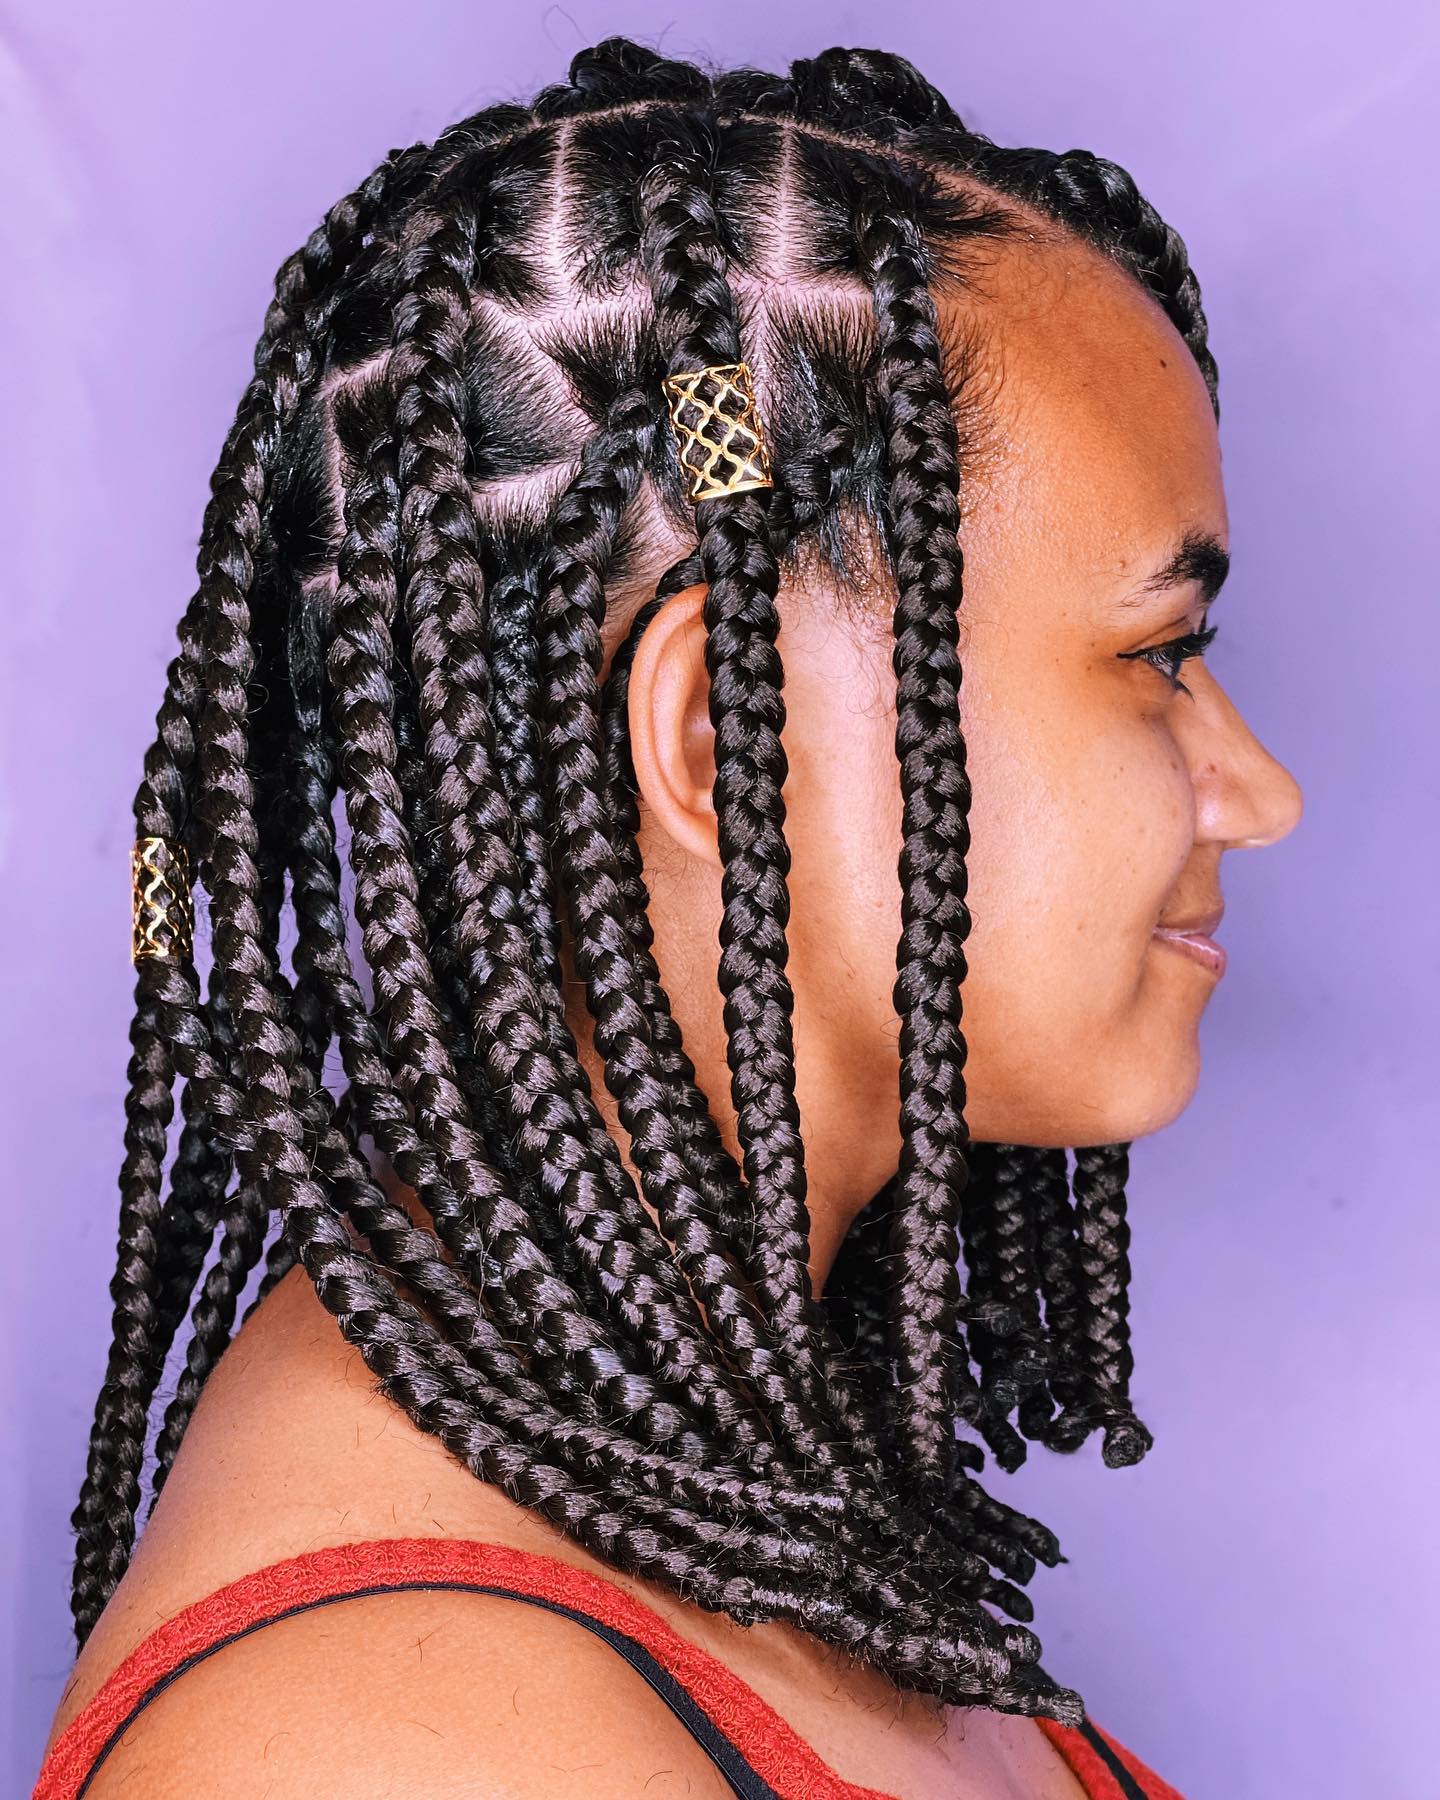 natural hairstyles for black women